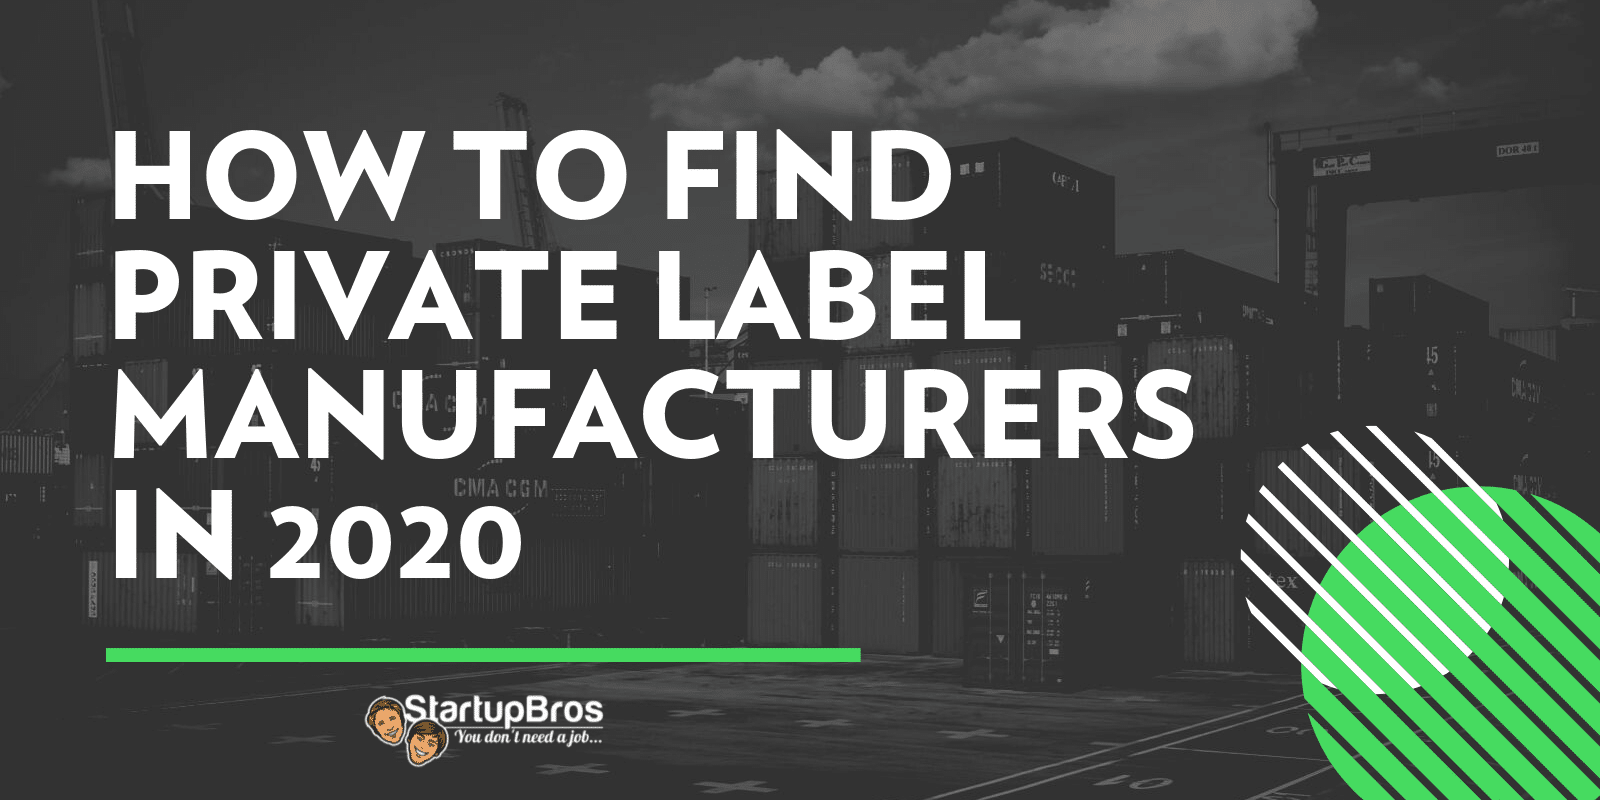 How to Find Private Label Manufacturers - social share